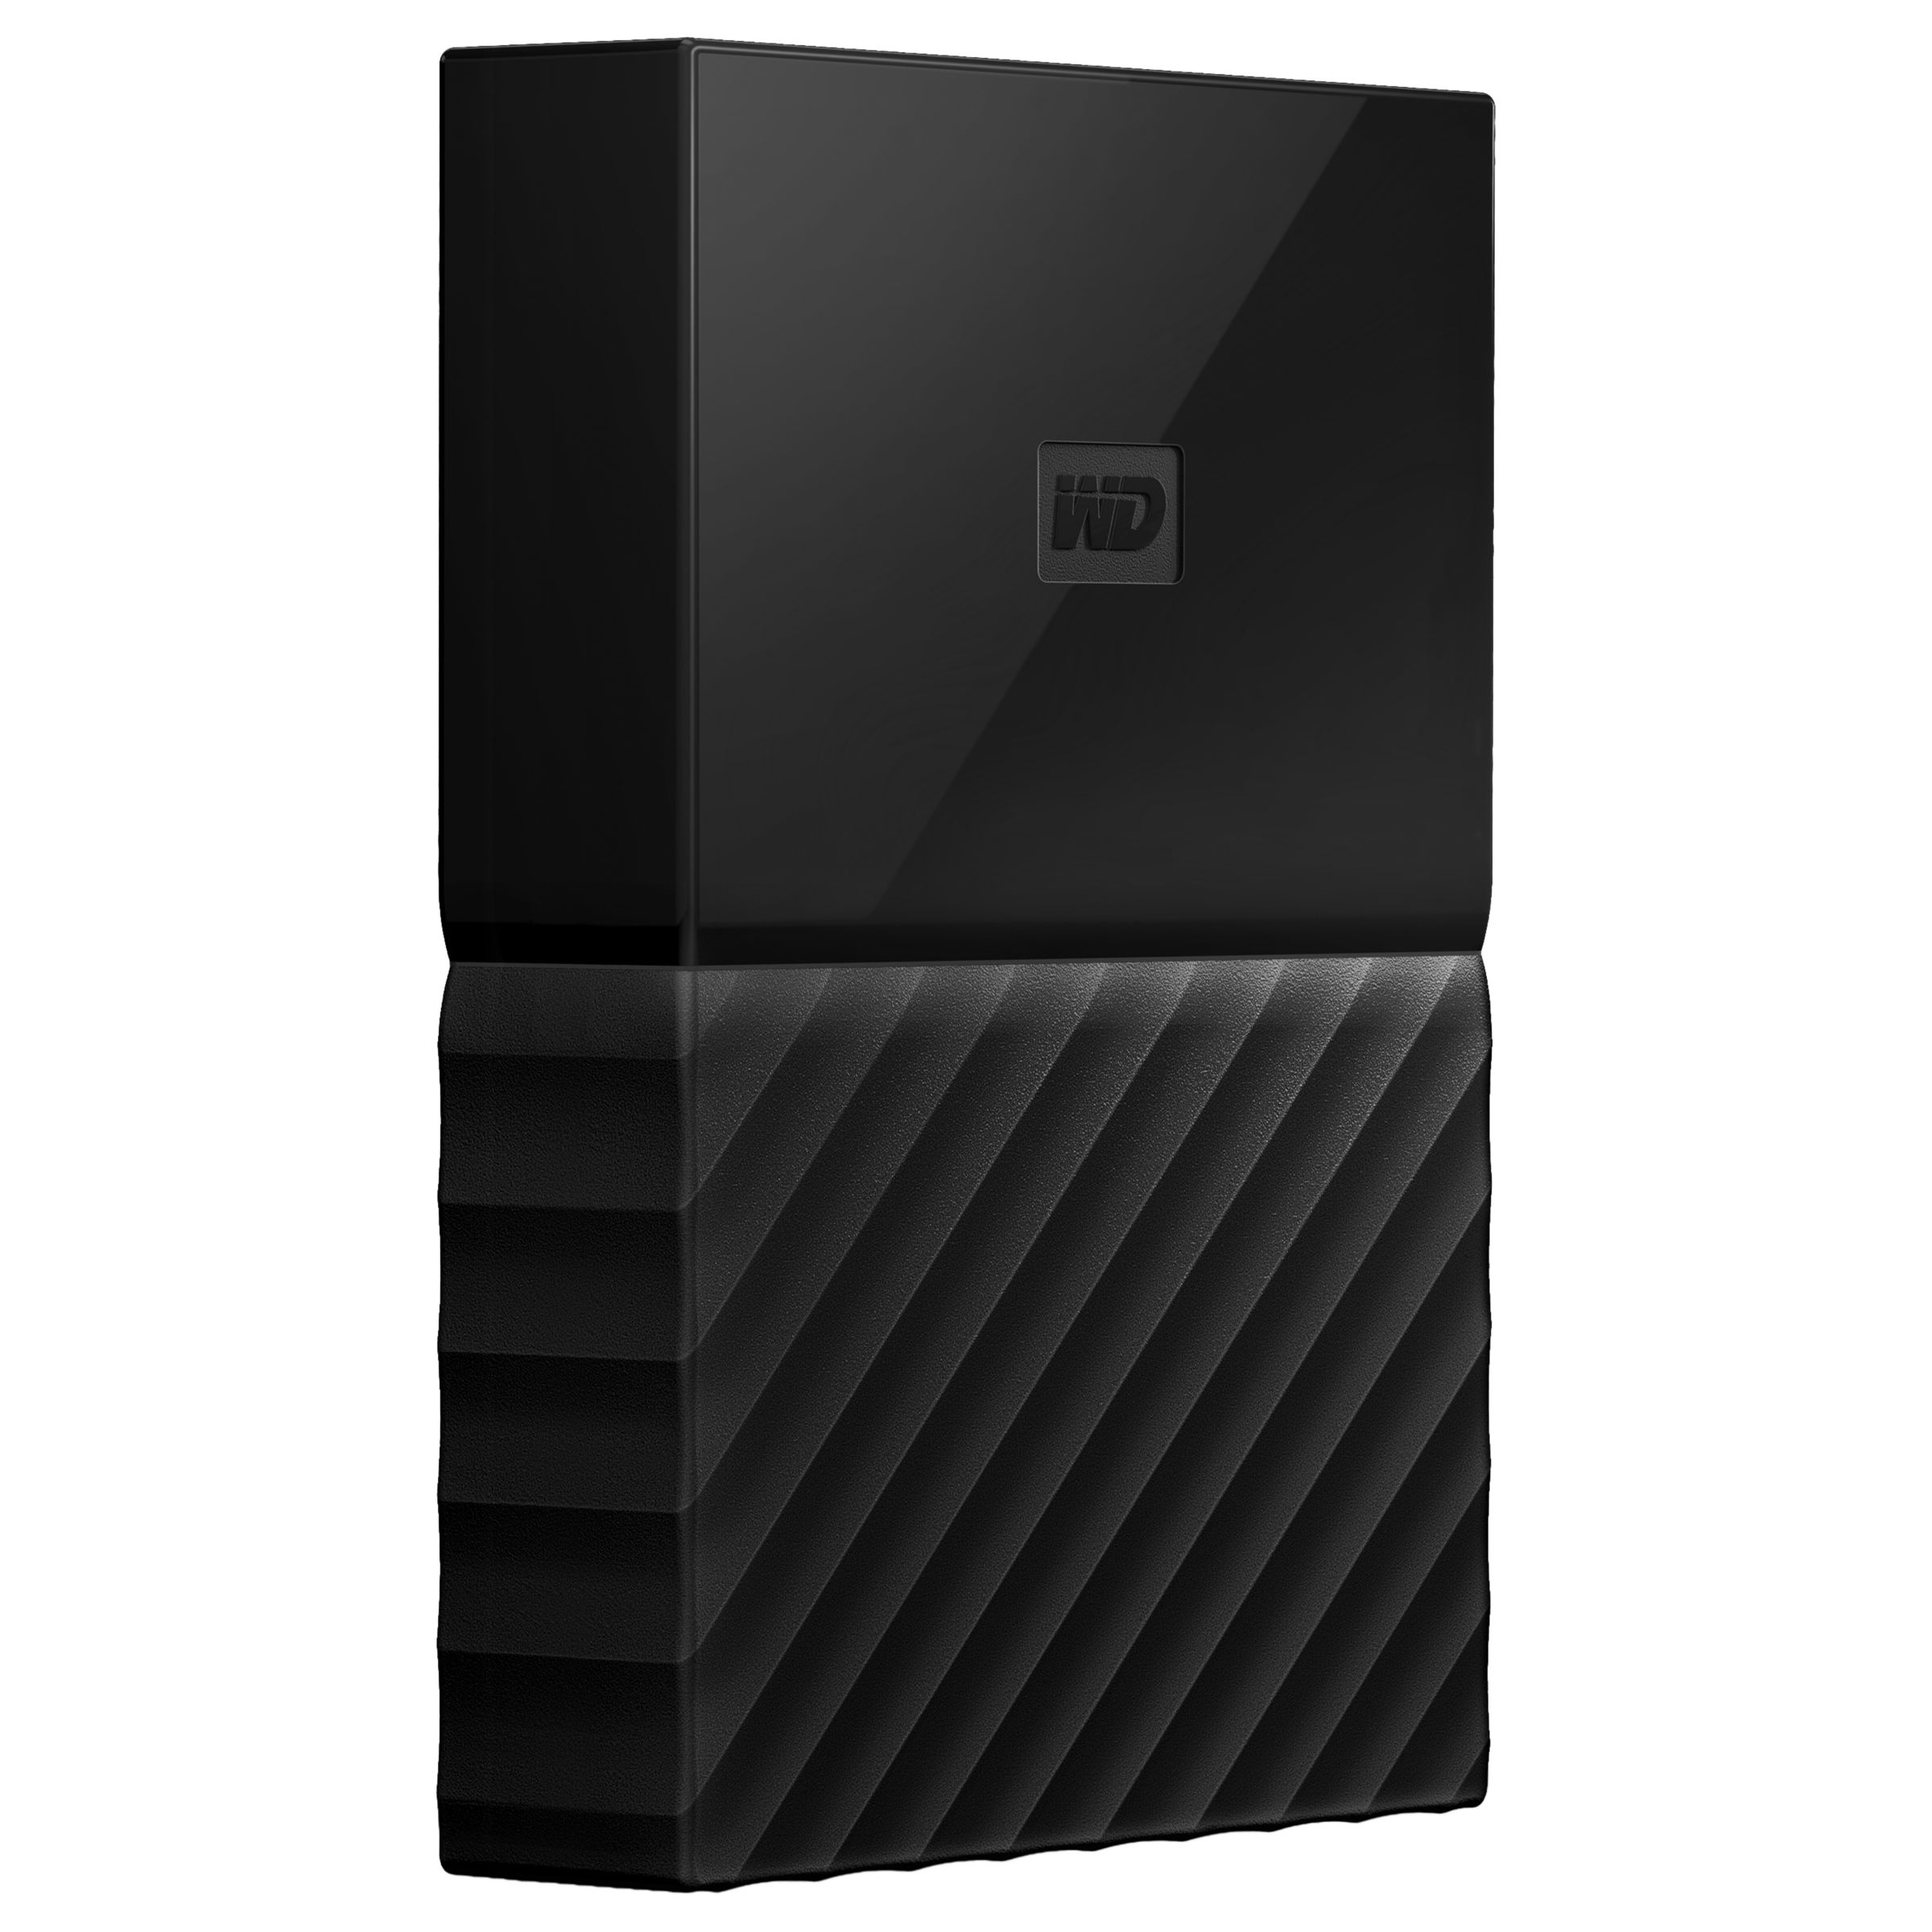 how to set up wd my passport for mac 2tb